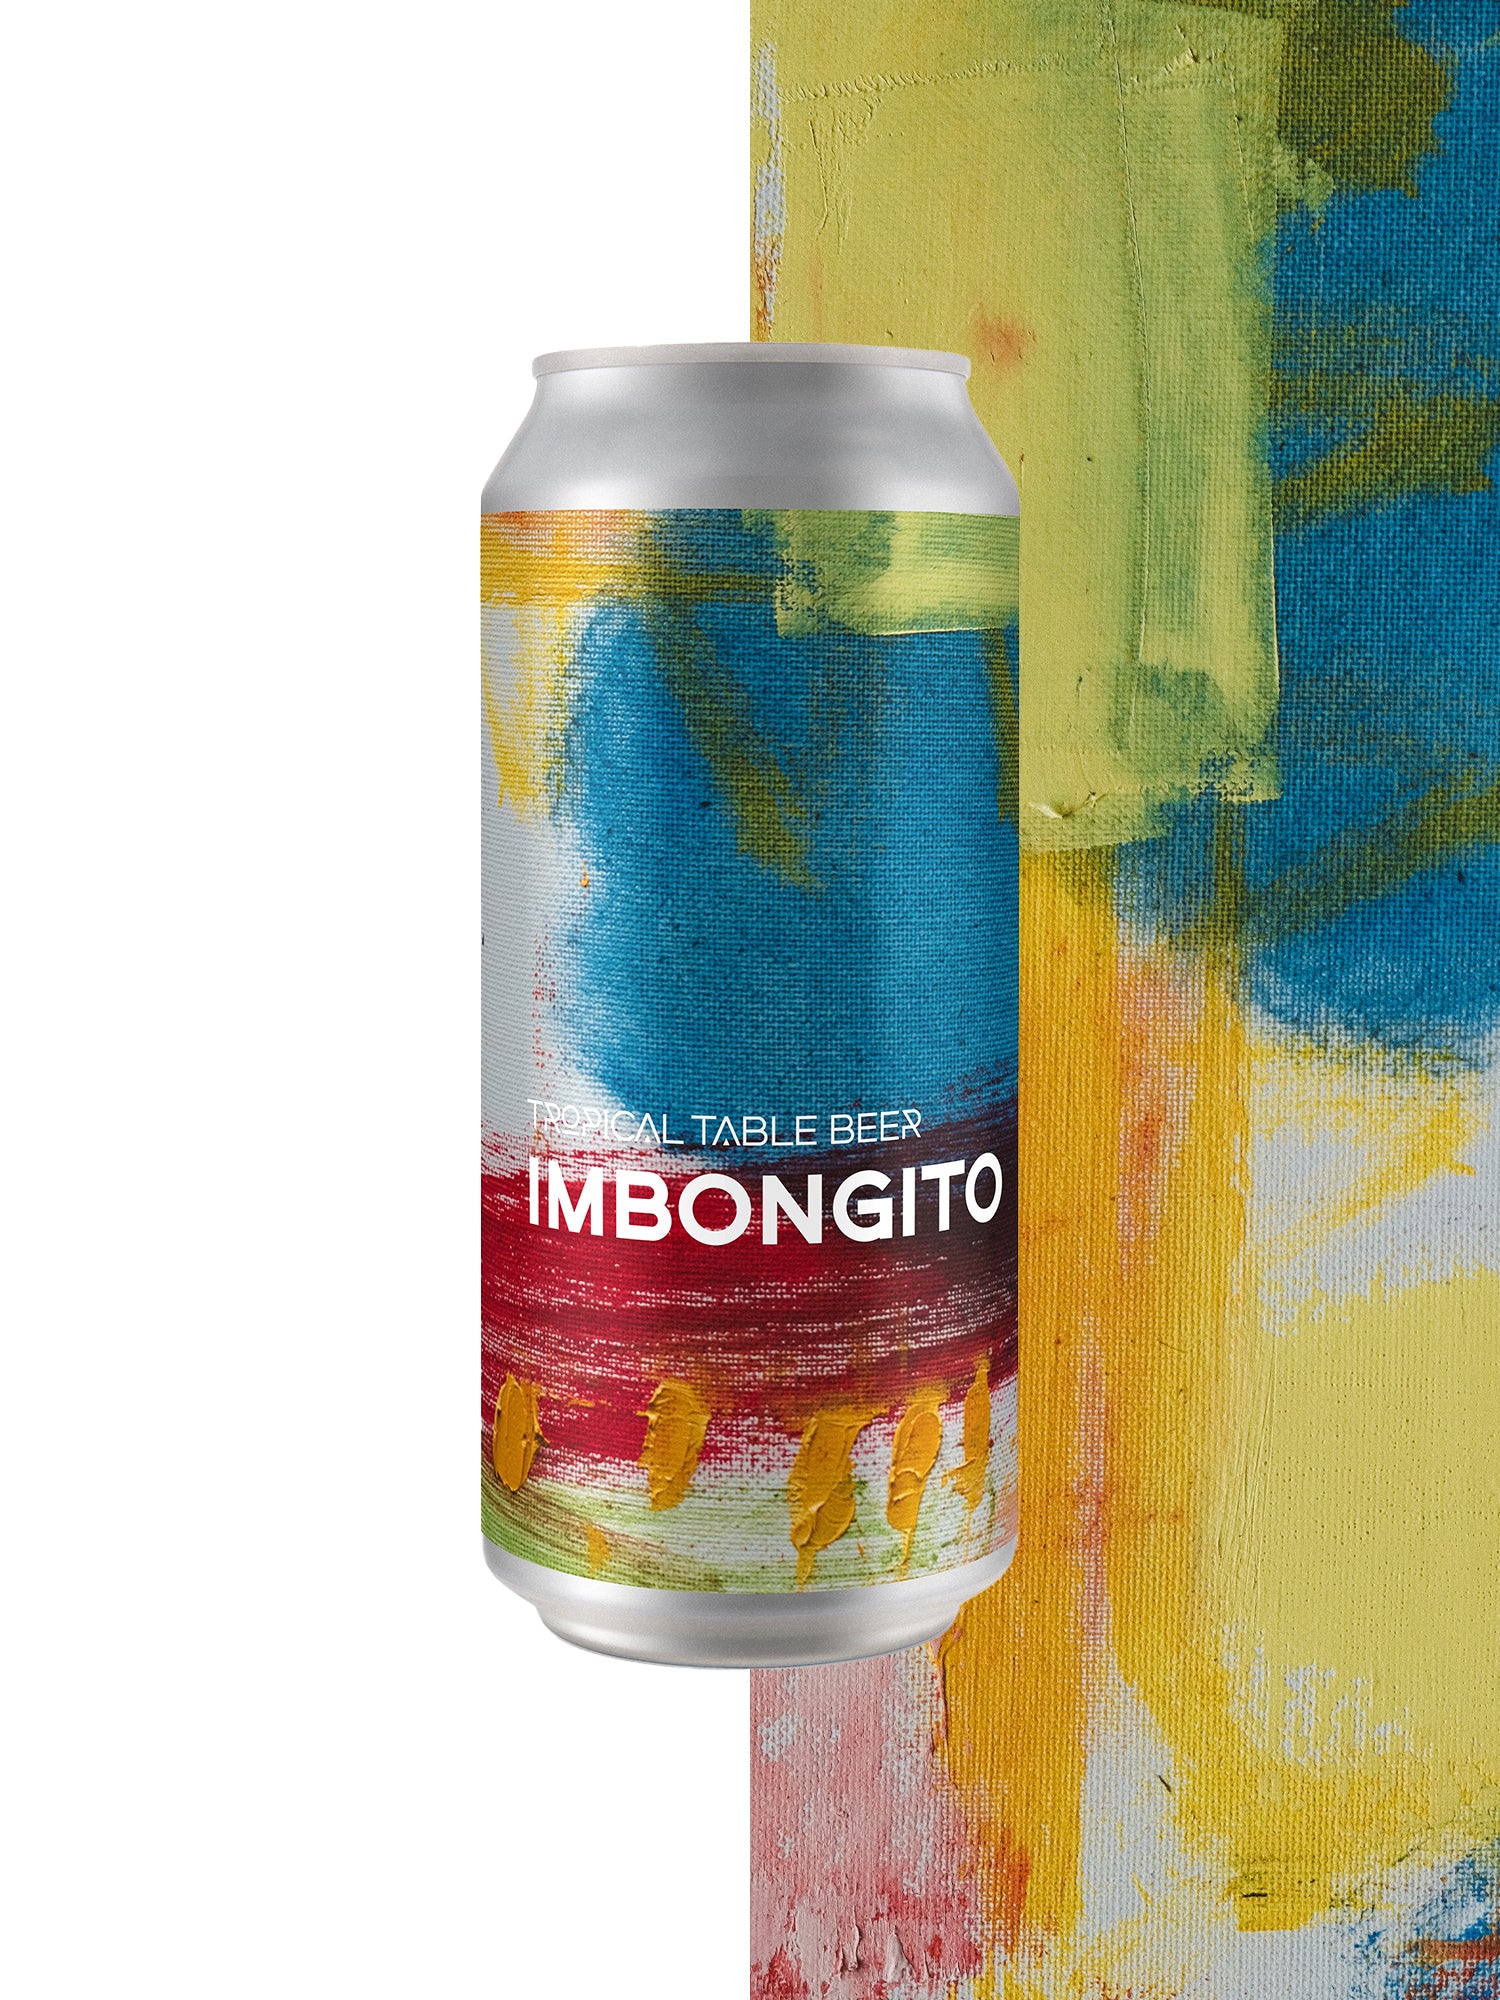 IMBONGITO Tropical Table Beer (4-pack) 2.5%